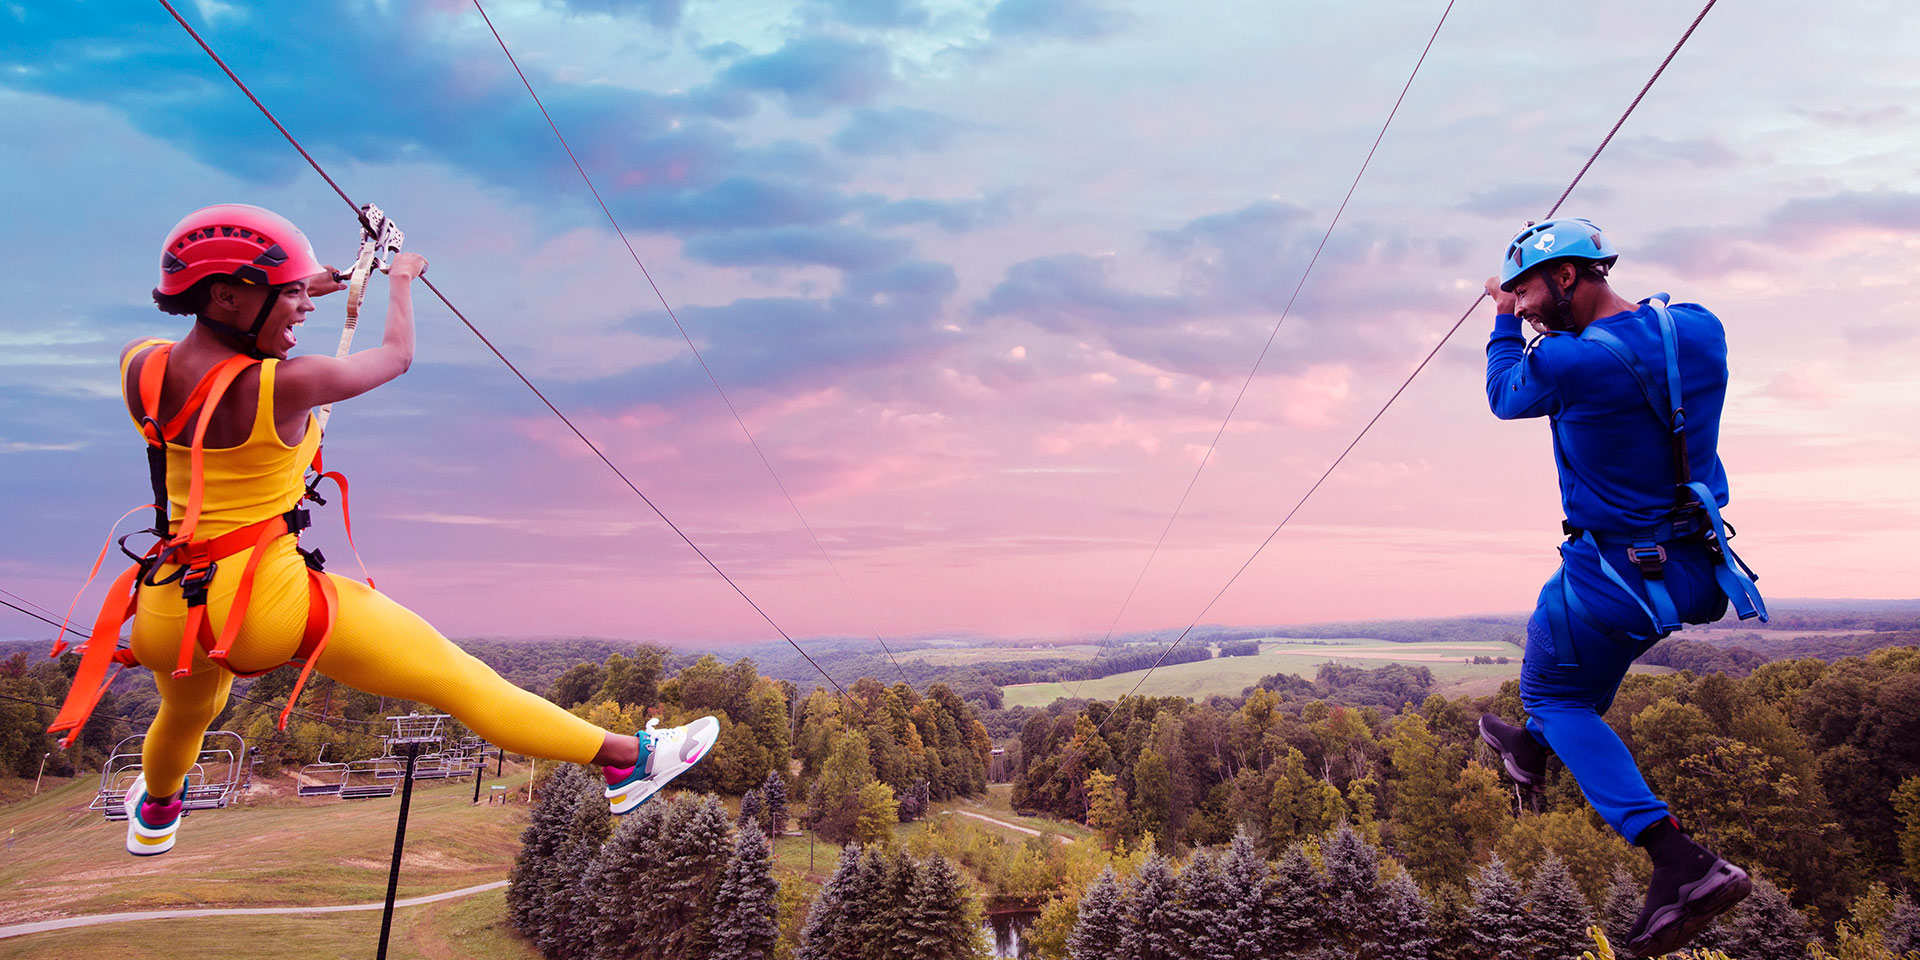 man and woman on a zipline parallel to one another